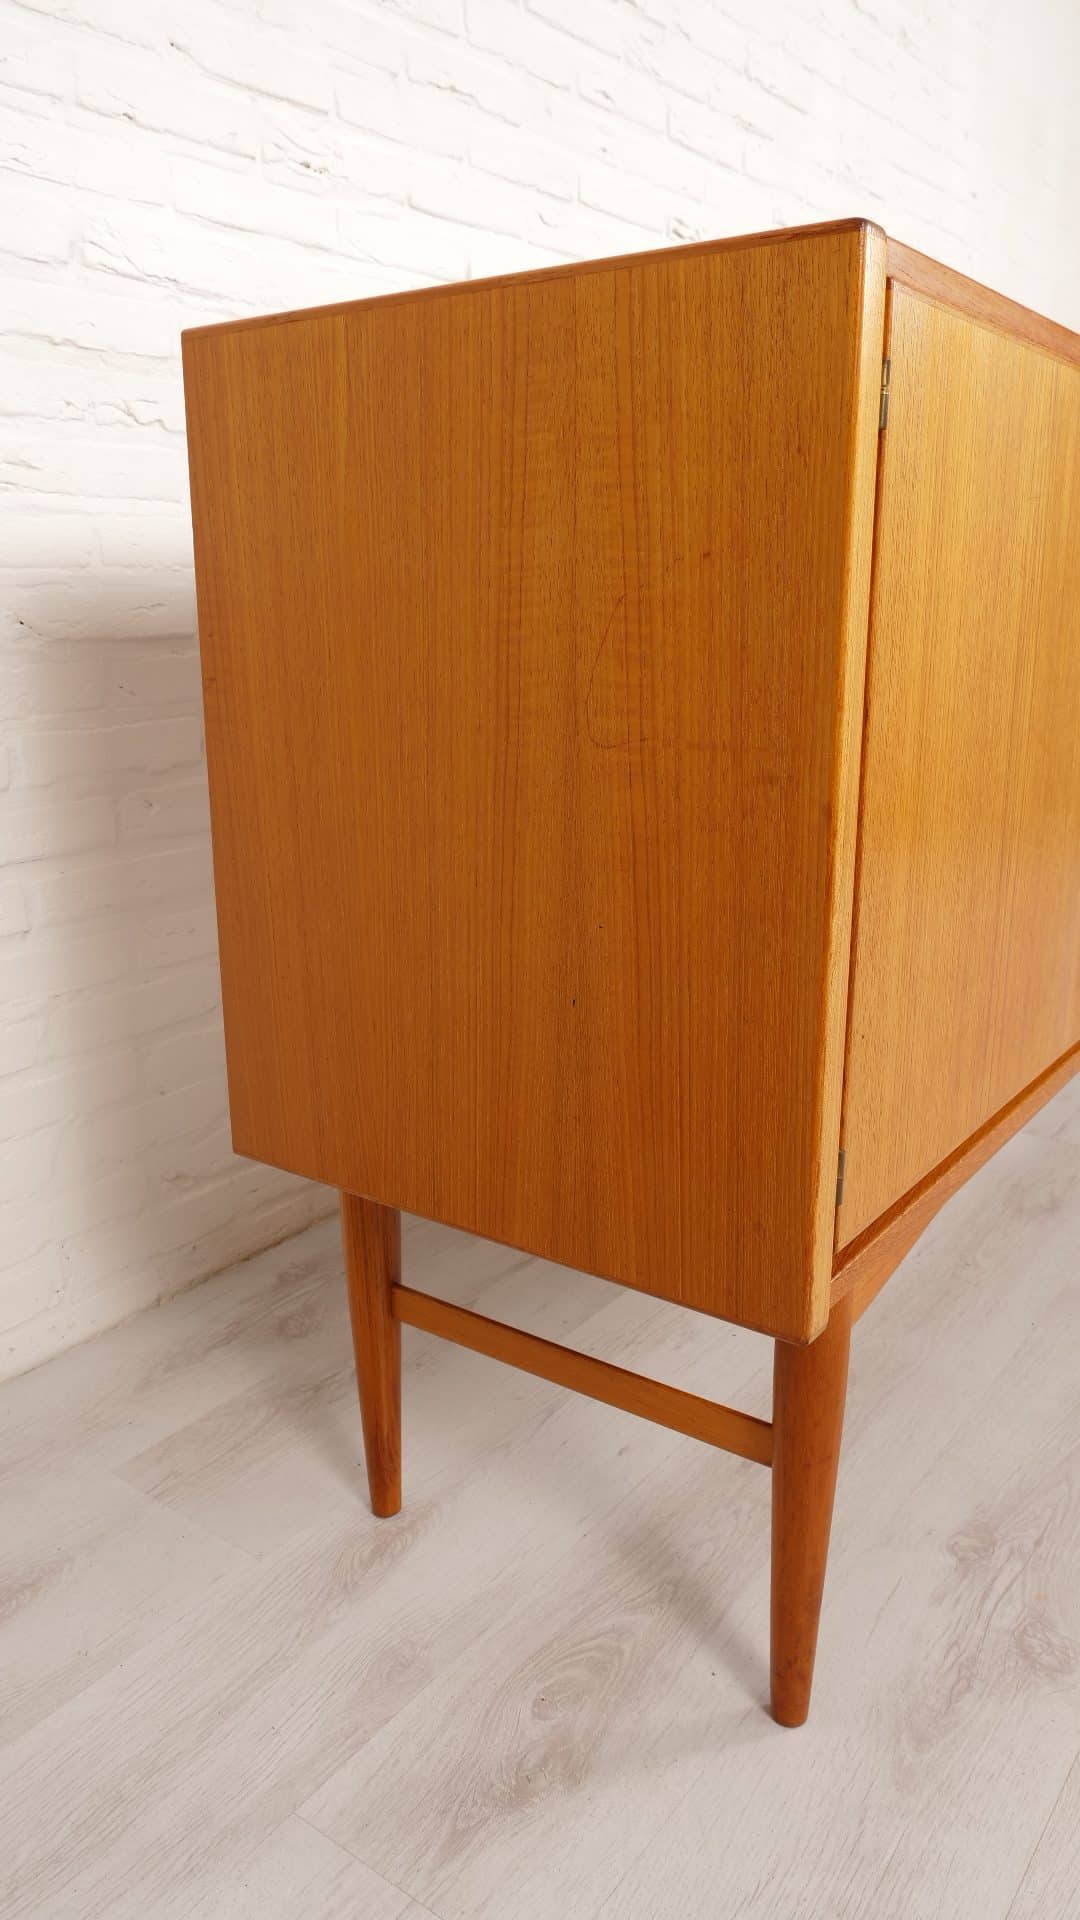 Trp Post Container Data Trp Post Id 9165 Vintage Sideboard Teak Mid Century Modern 202 cm Trp Post Container